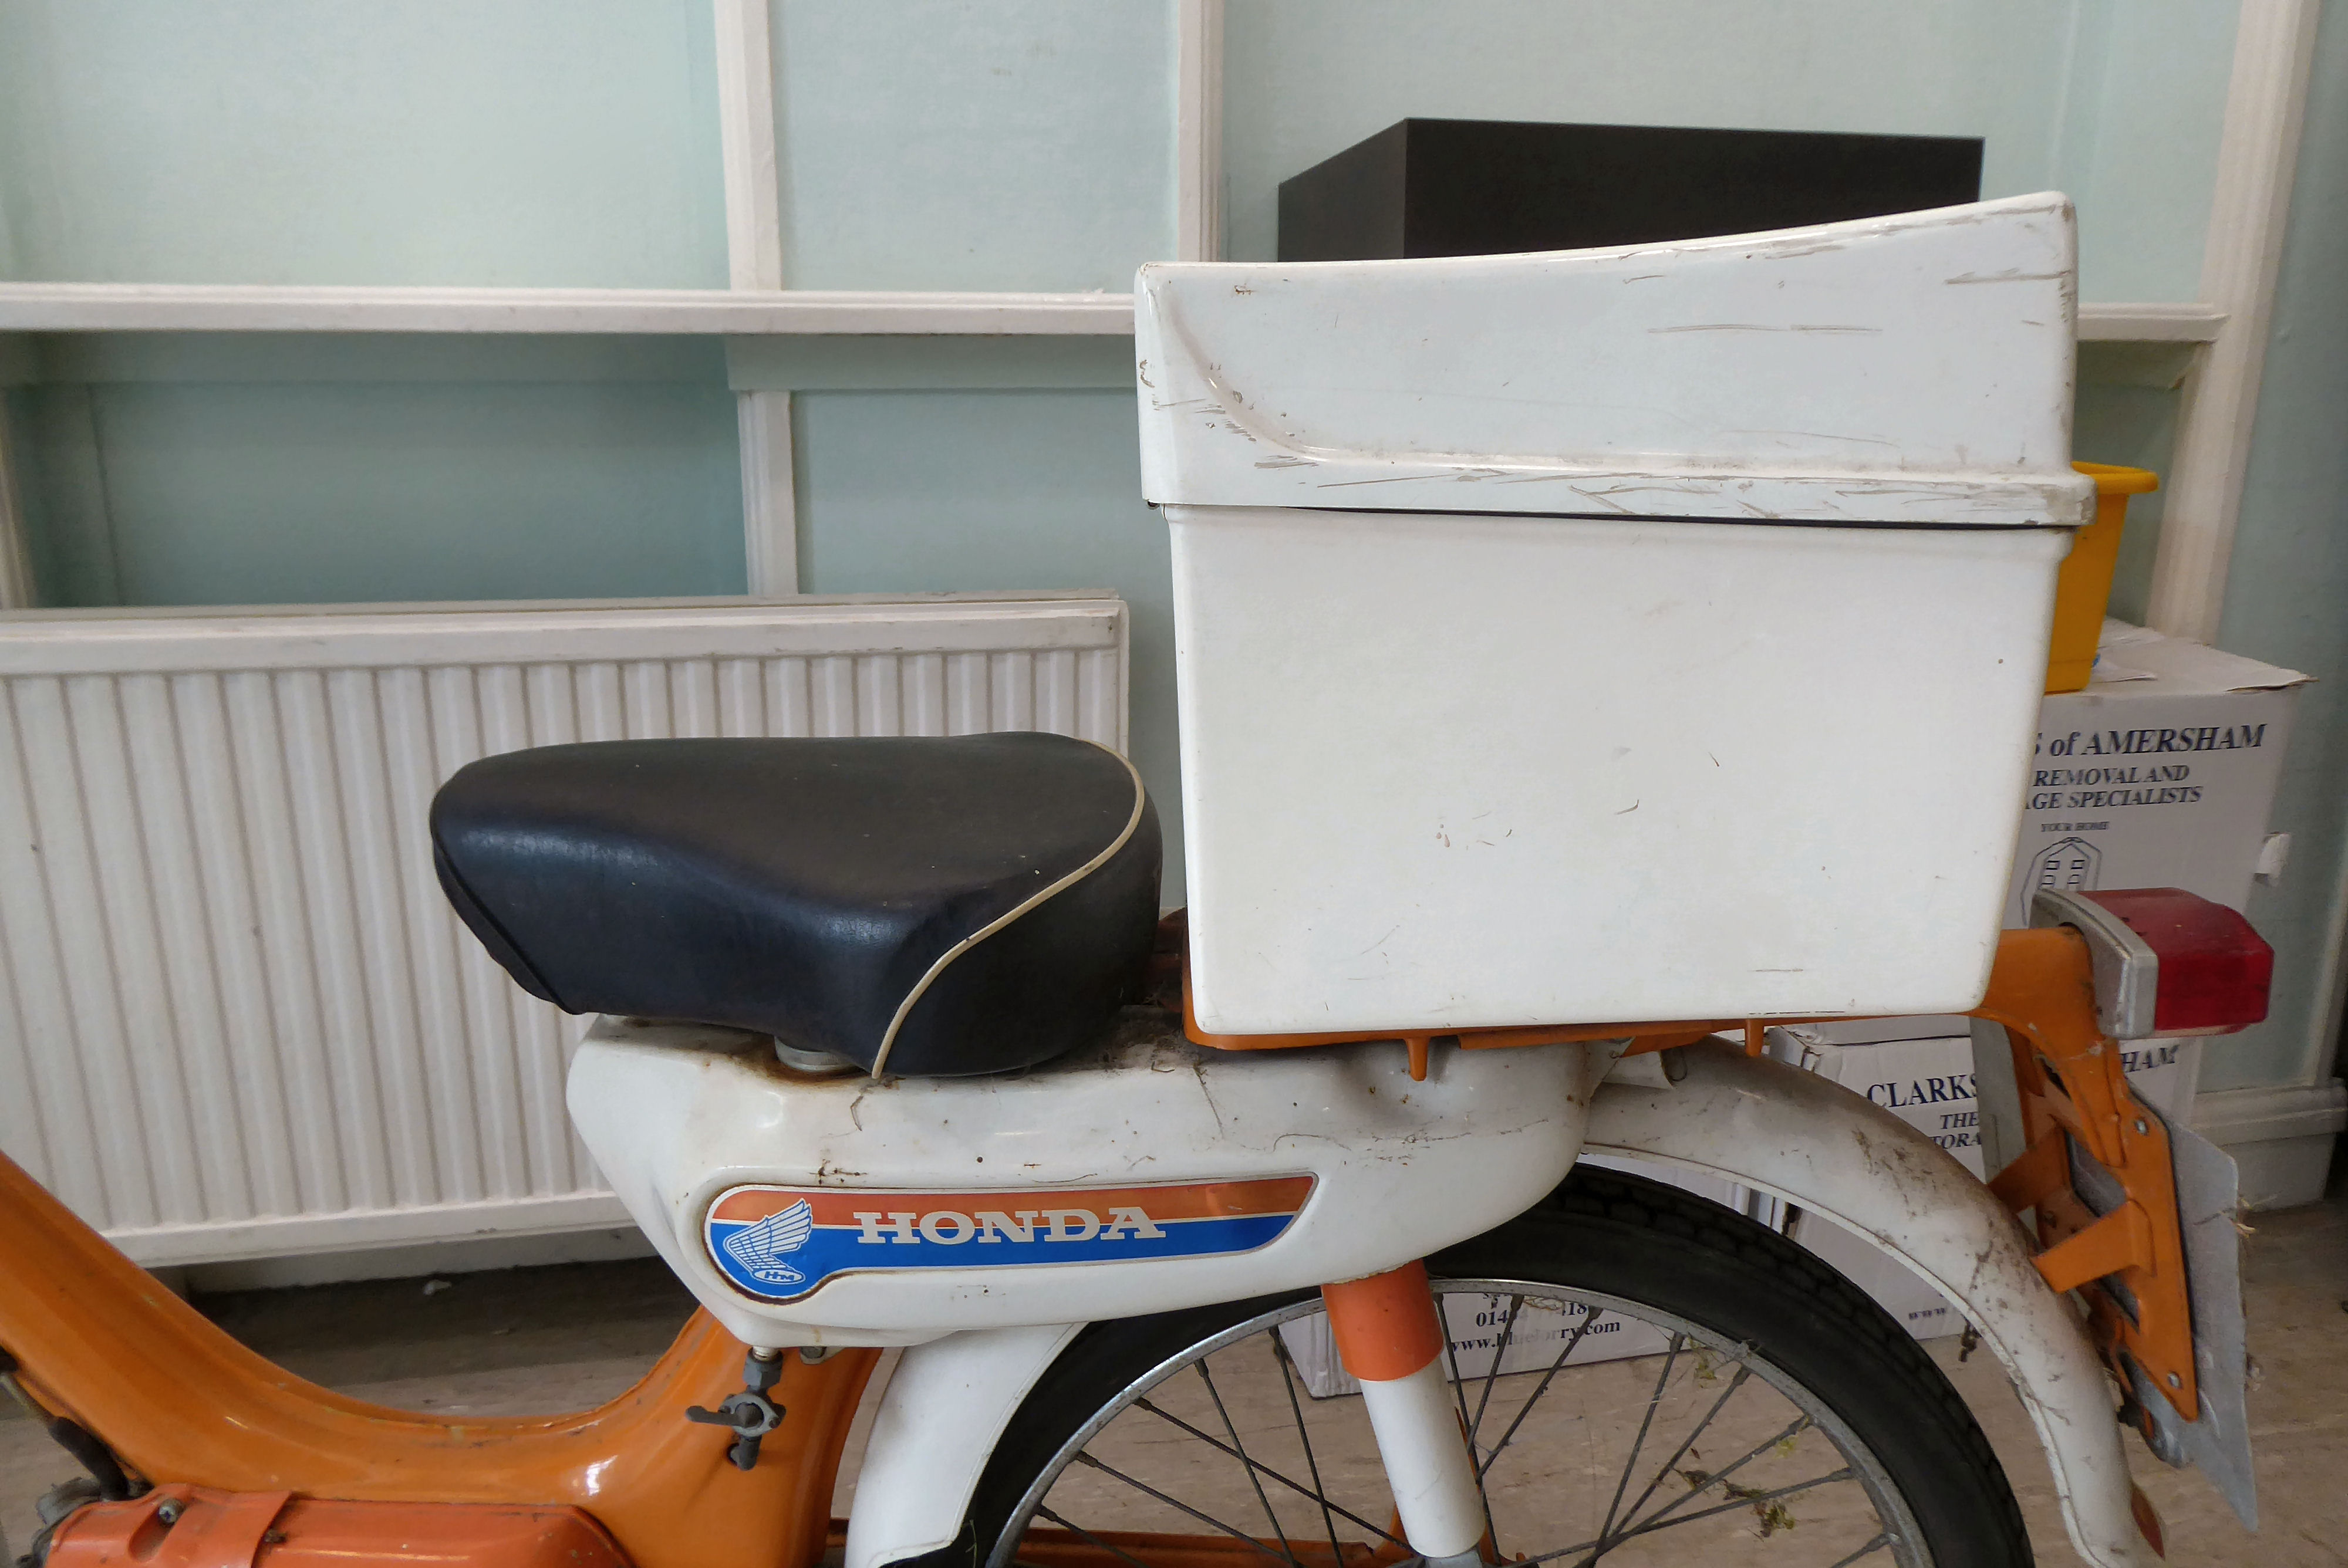 A 1975 Honda 49cc moped in orange and white livery, original registration plates for JGS 258N but no - Image 9 of 12